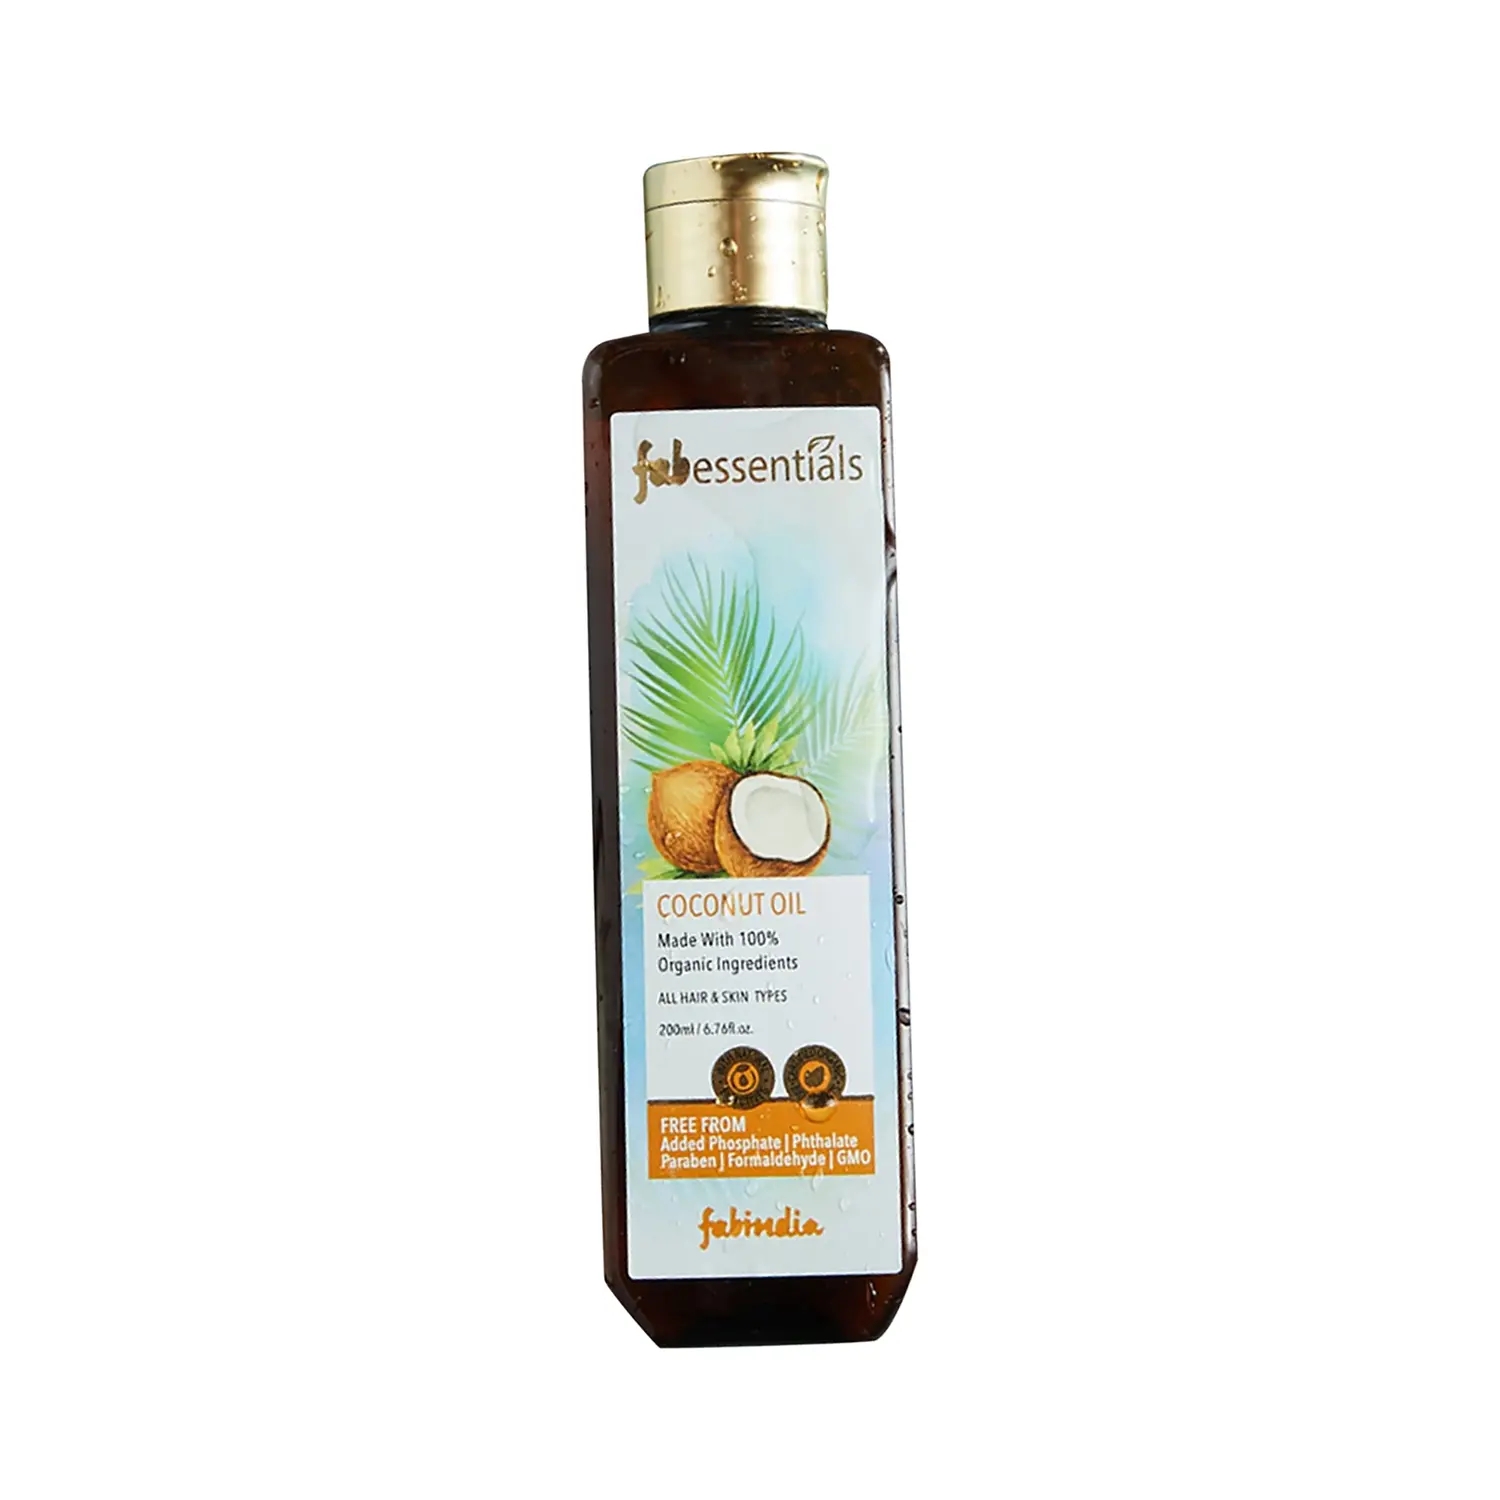 Fabessentials by Fabindia | Fabessentials Coconut Oil (200ml)